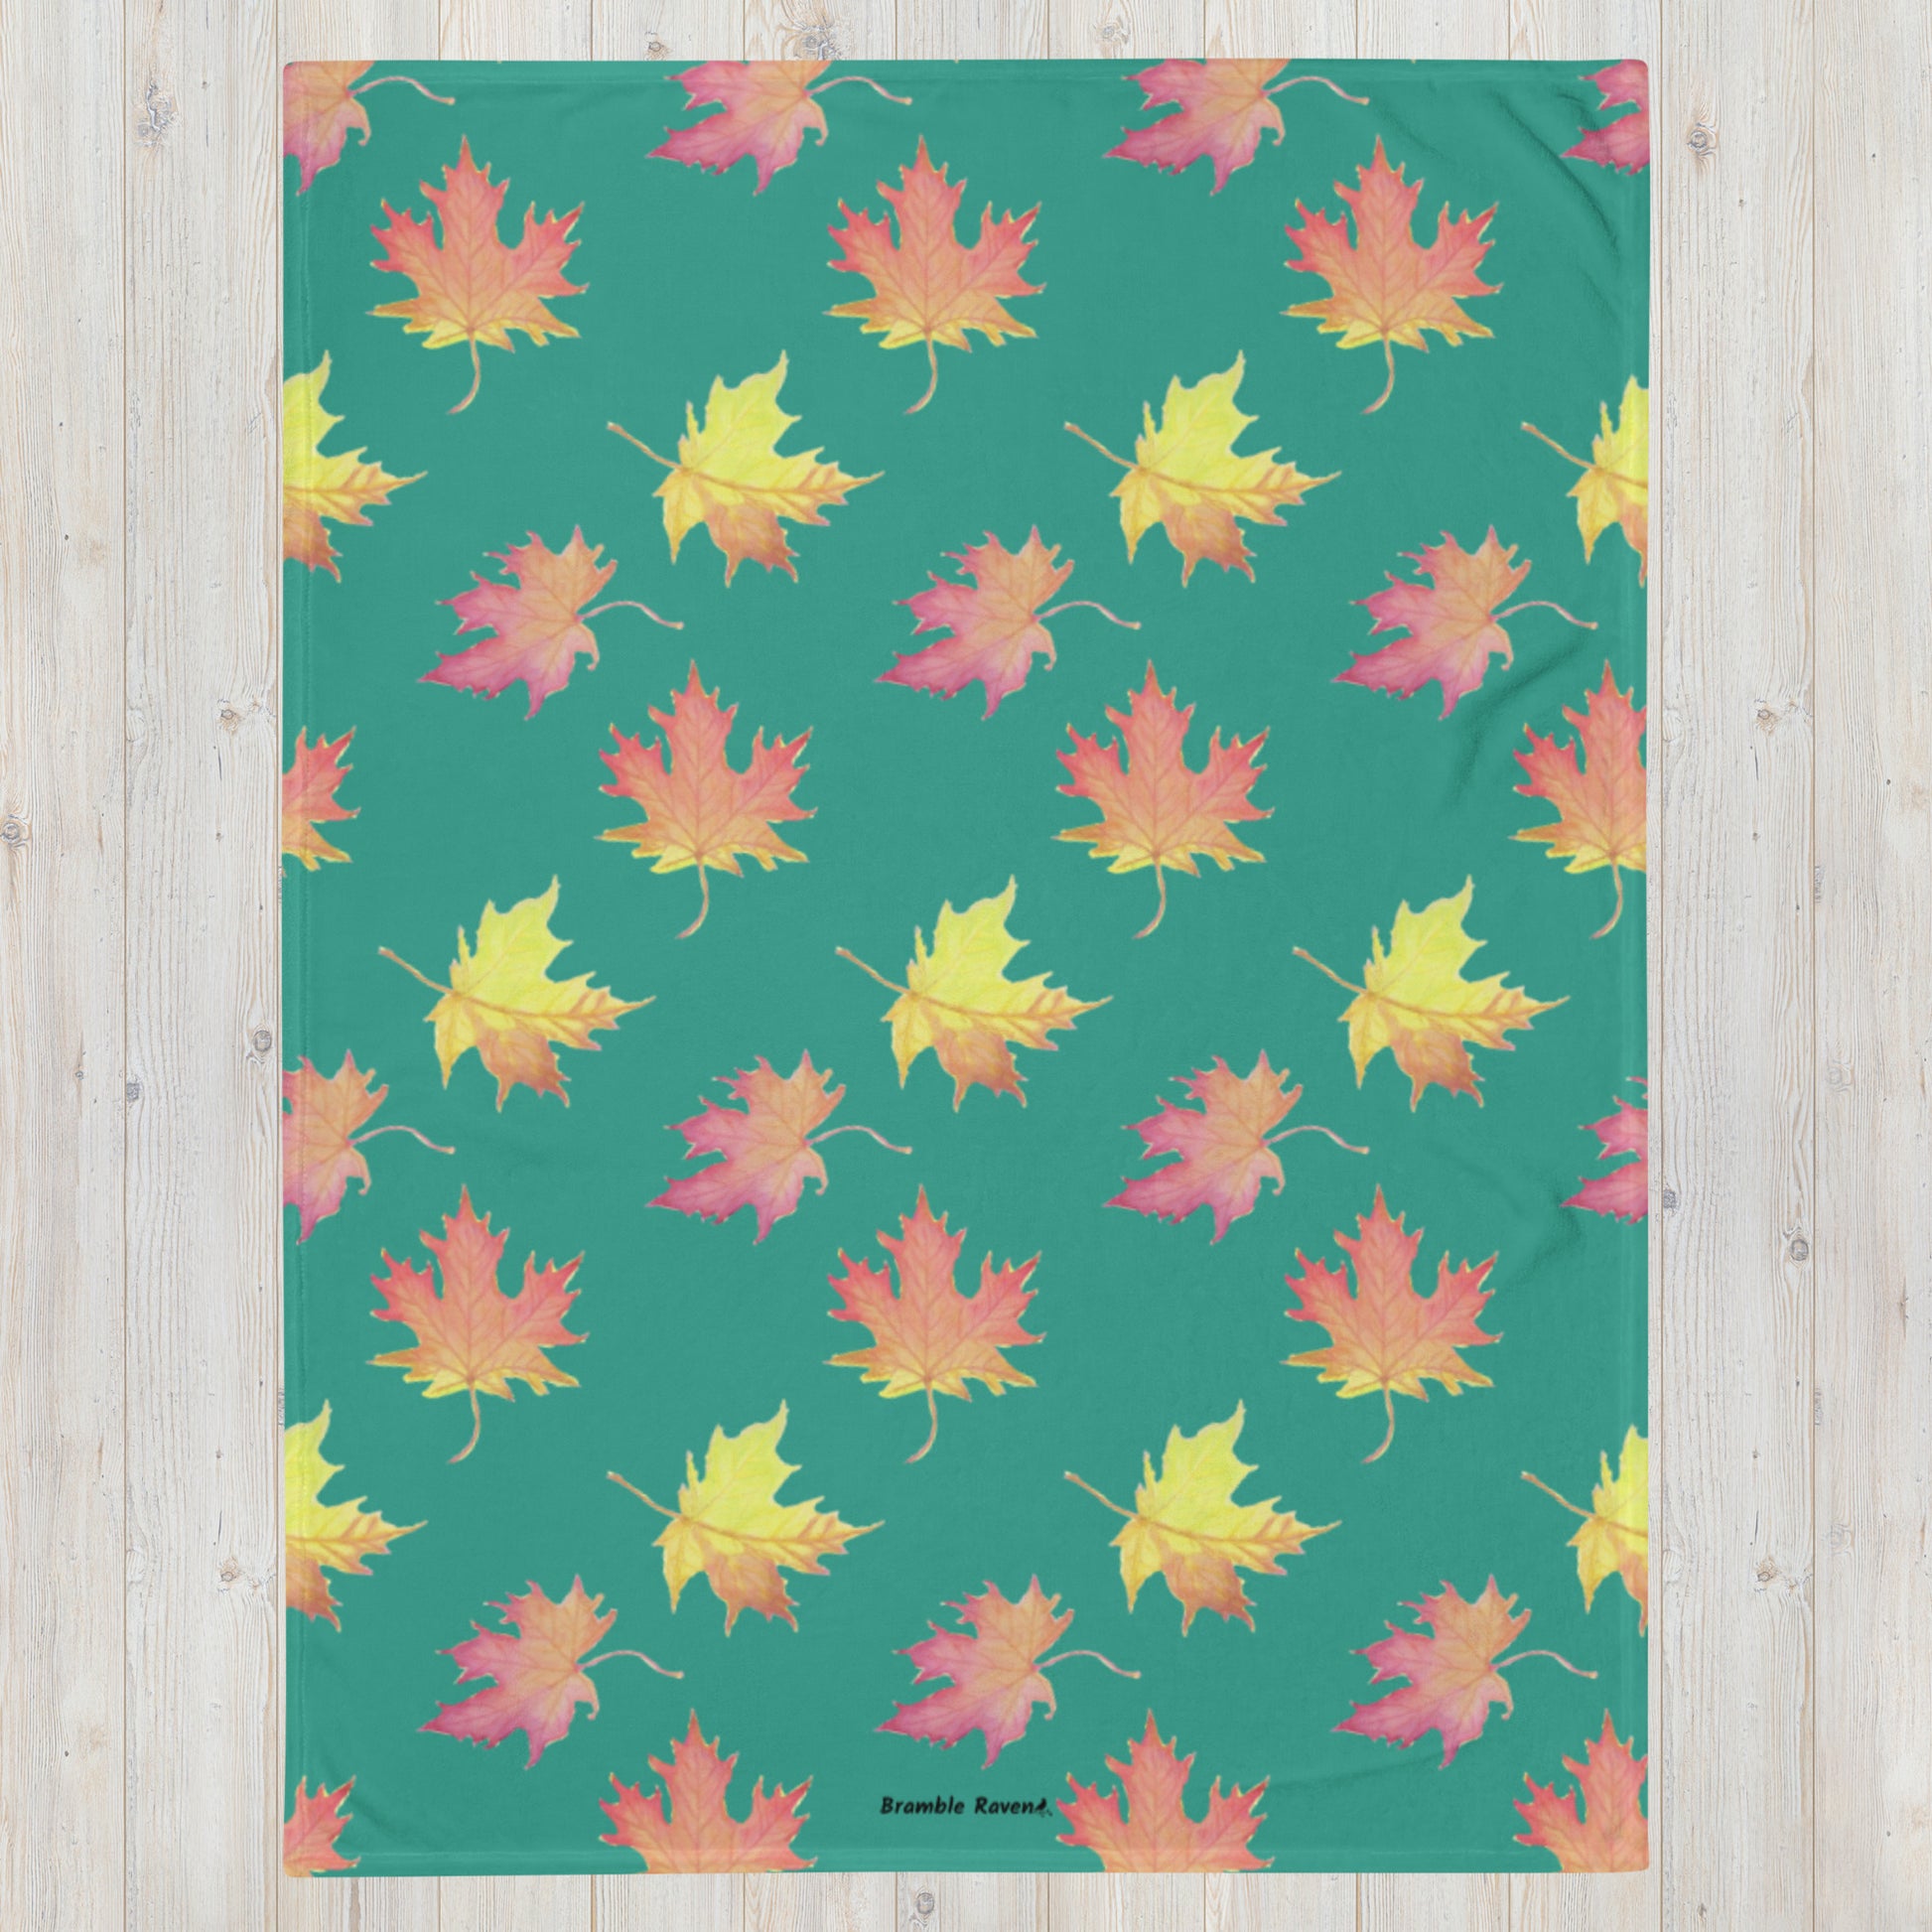 60 by 80 inch soft throw blanket featuring watercolor fall leaves patterned on a dark green background.